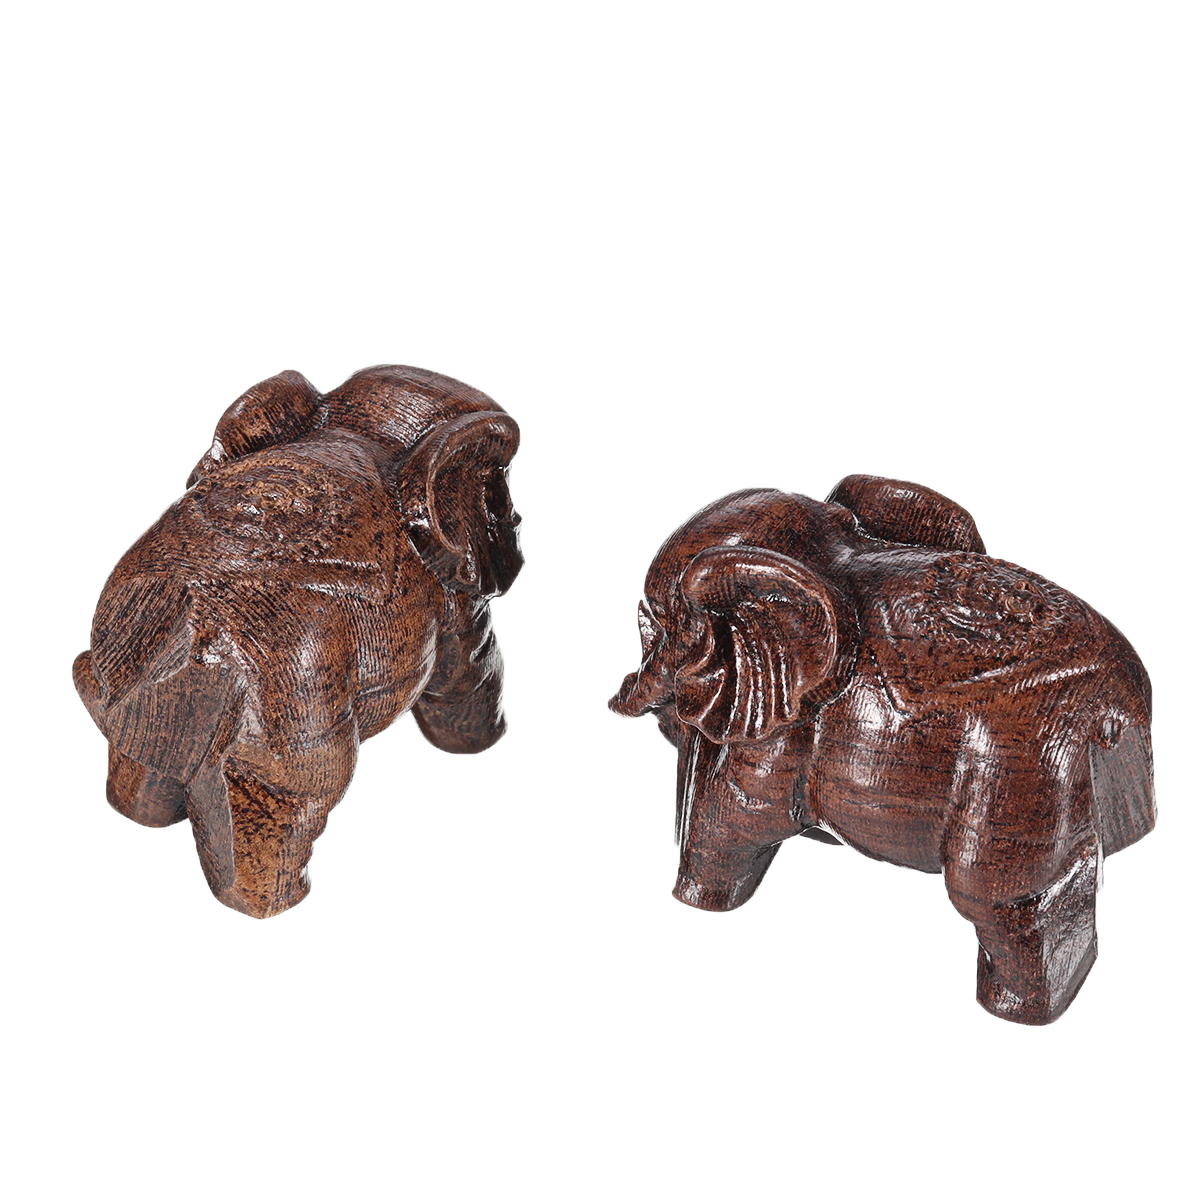 1-Pair-Natural-Agarwood-Elephant-Wood-Carving-Wood-Crafts-Retro-Decoration-Craft-Creative-Gifts-Home-1759099-9